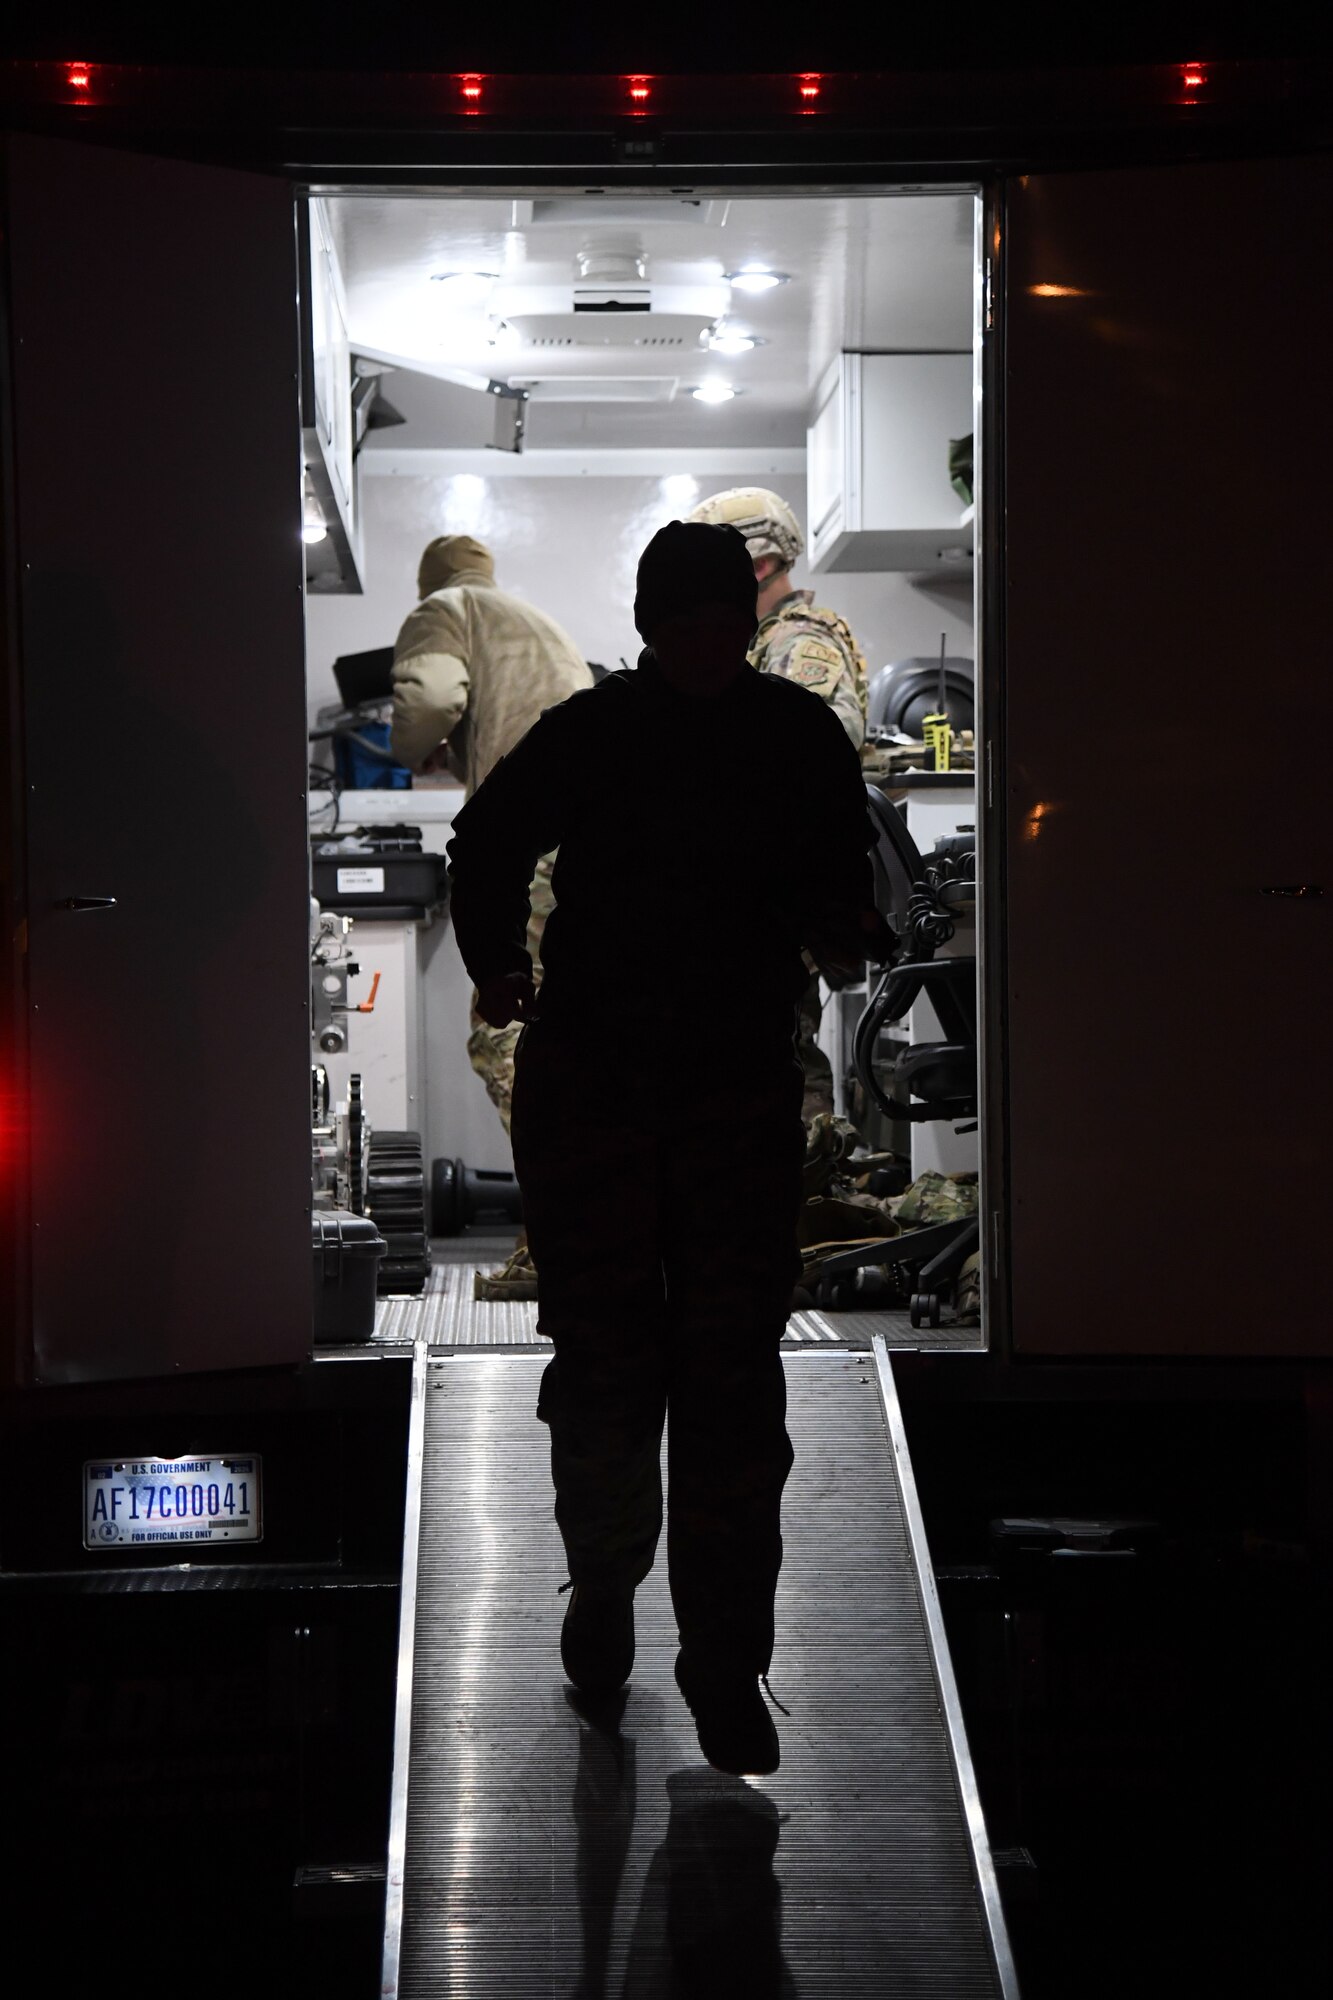 Senior Airman Rachel Zirkle, 436th Civil Engineer Squadron explosive ordnance disposal journeyman, exits a vehicle while responding to a suspicious package scenario during exercise Dover Operational Readiness for a Multi-domain Agile Response at Dover Air Force Base, Del., Nov. 13, 2019. DORMAR was a four-day exercise testing the installation’s ability to respond to various scenarios, including emergency response and rapid deployment. (U.S. Air Force photo by Senior Airman Eric M. Fisher)